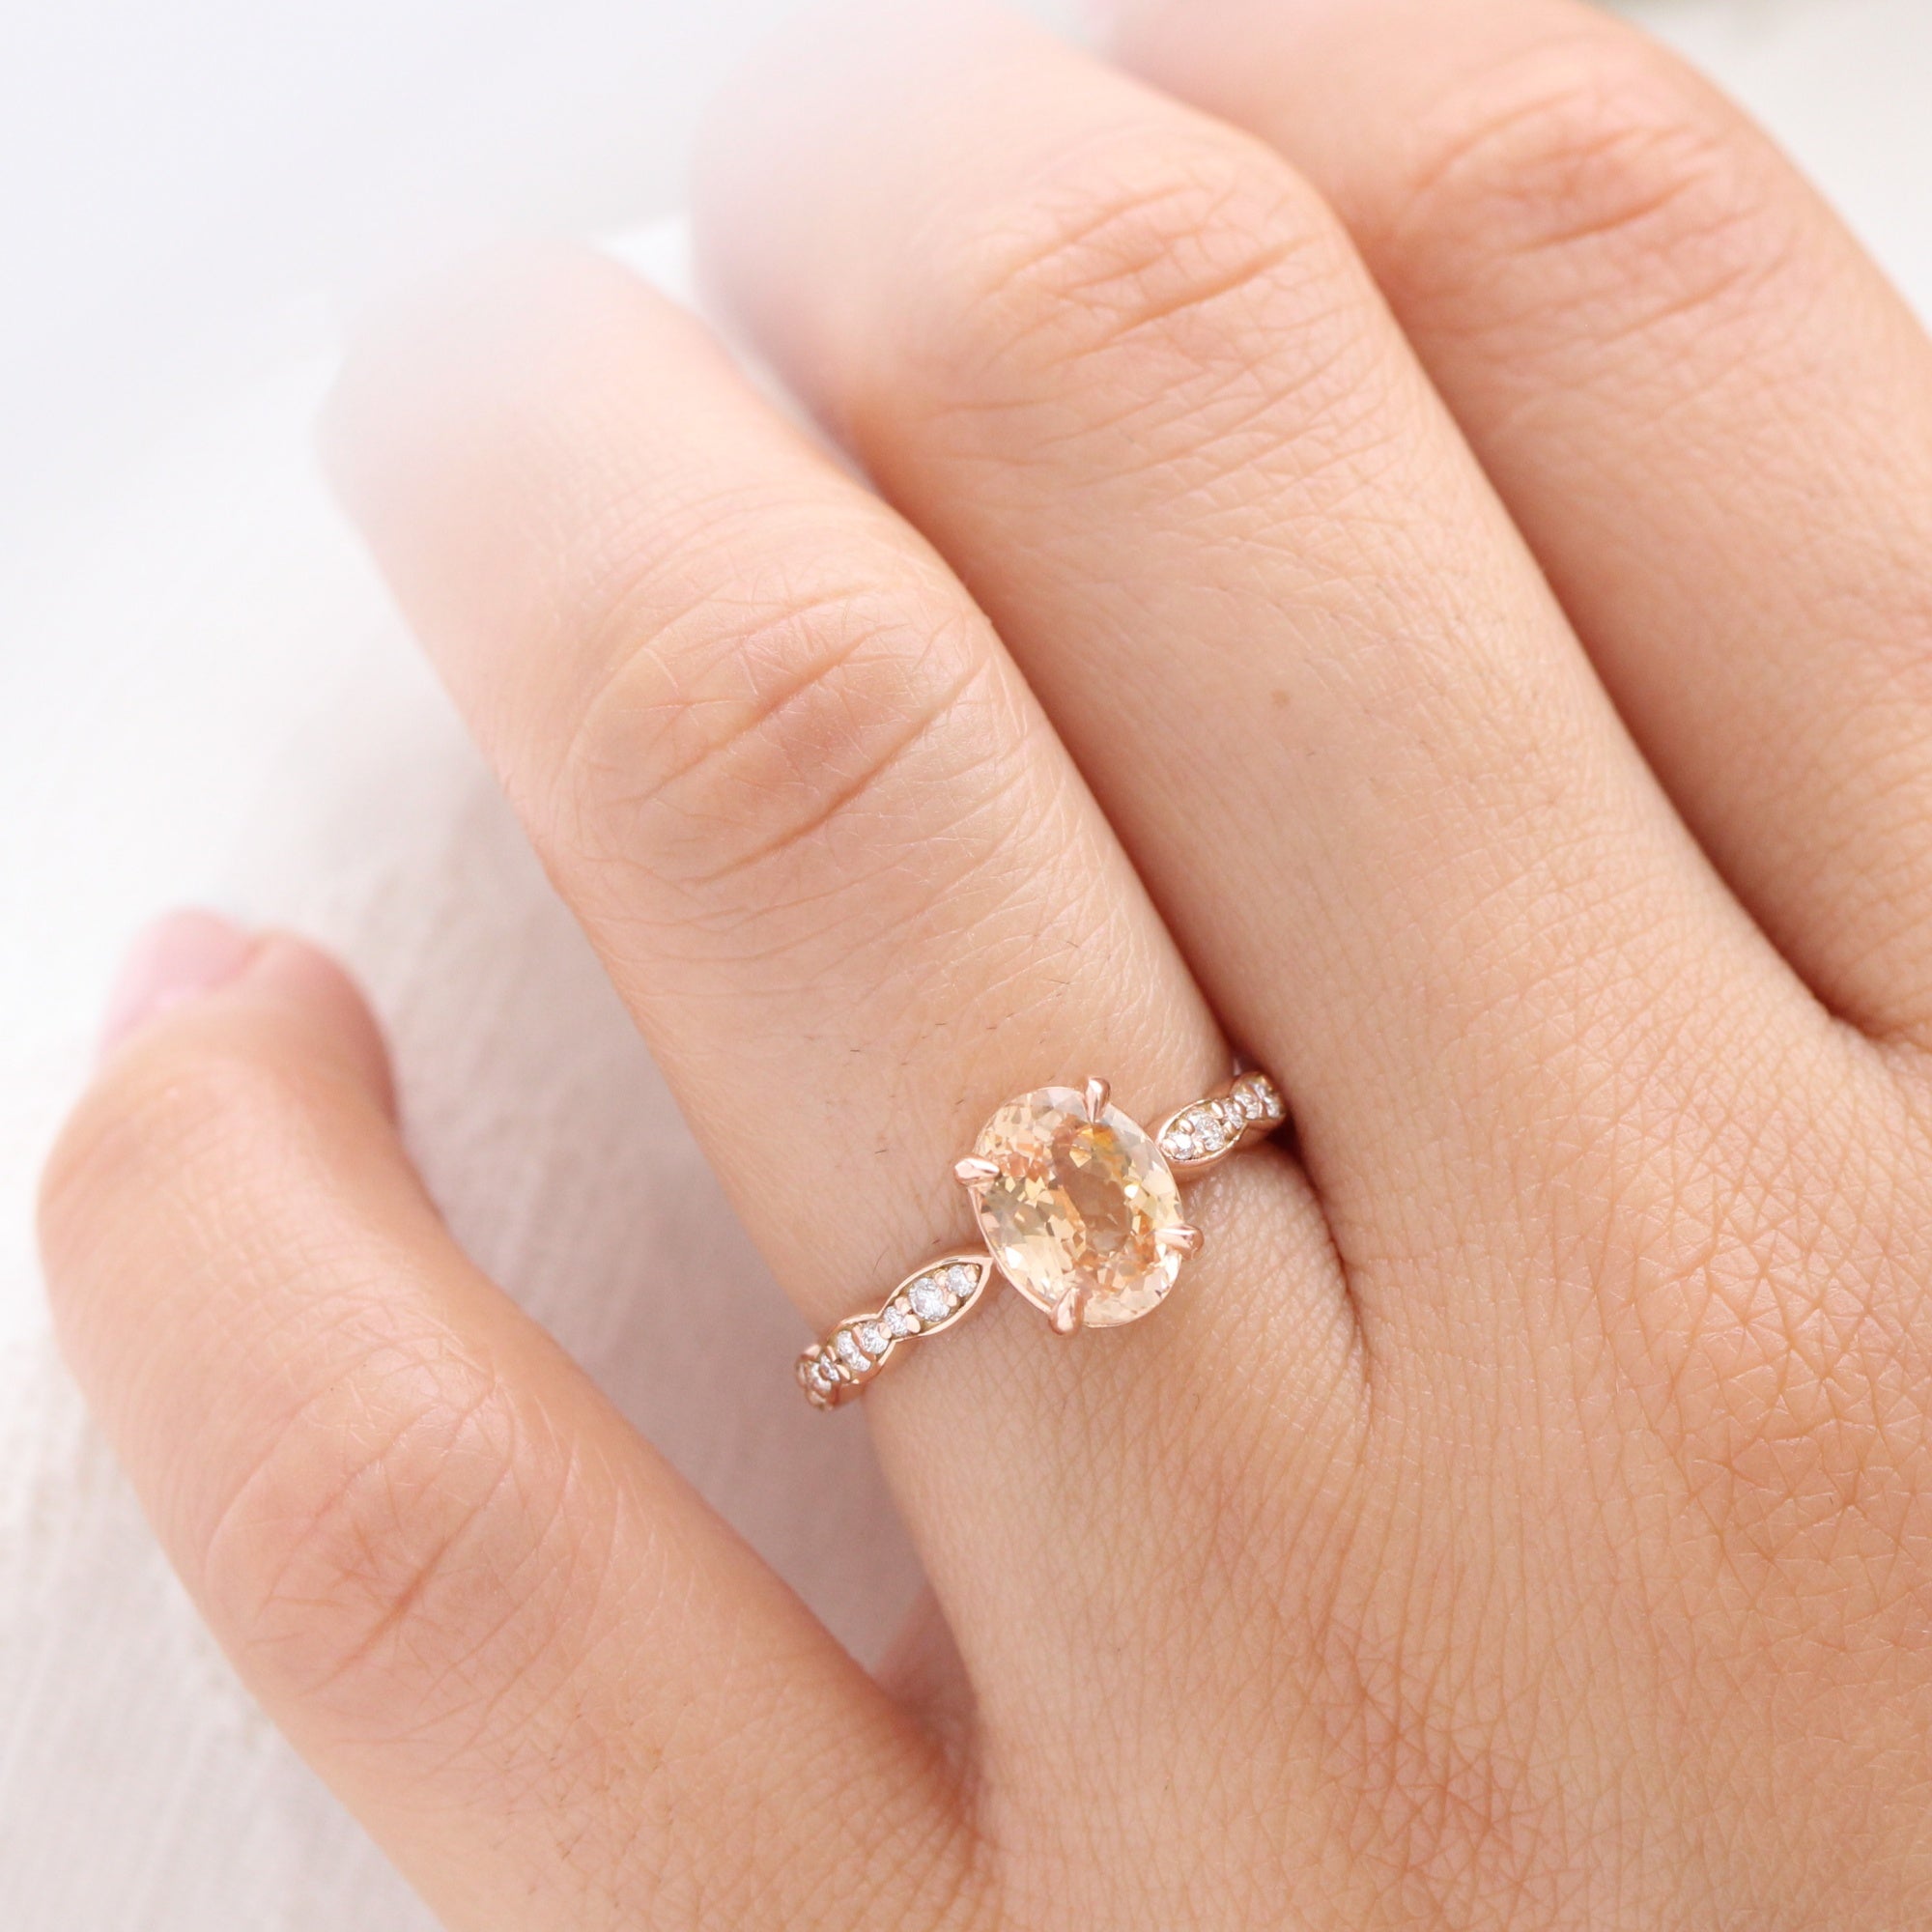 Oval peach sapphire ring rose gold diamond band low set engagement ring la more design jewelry